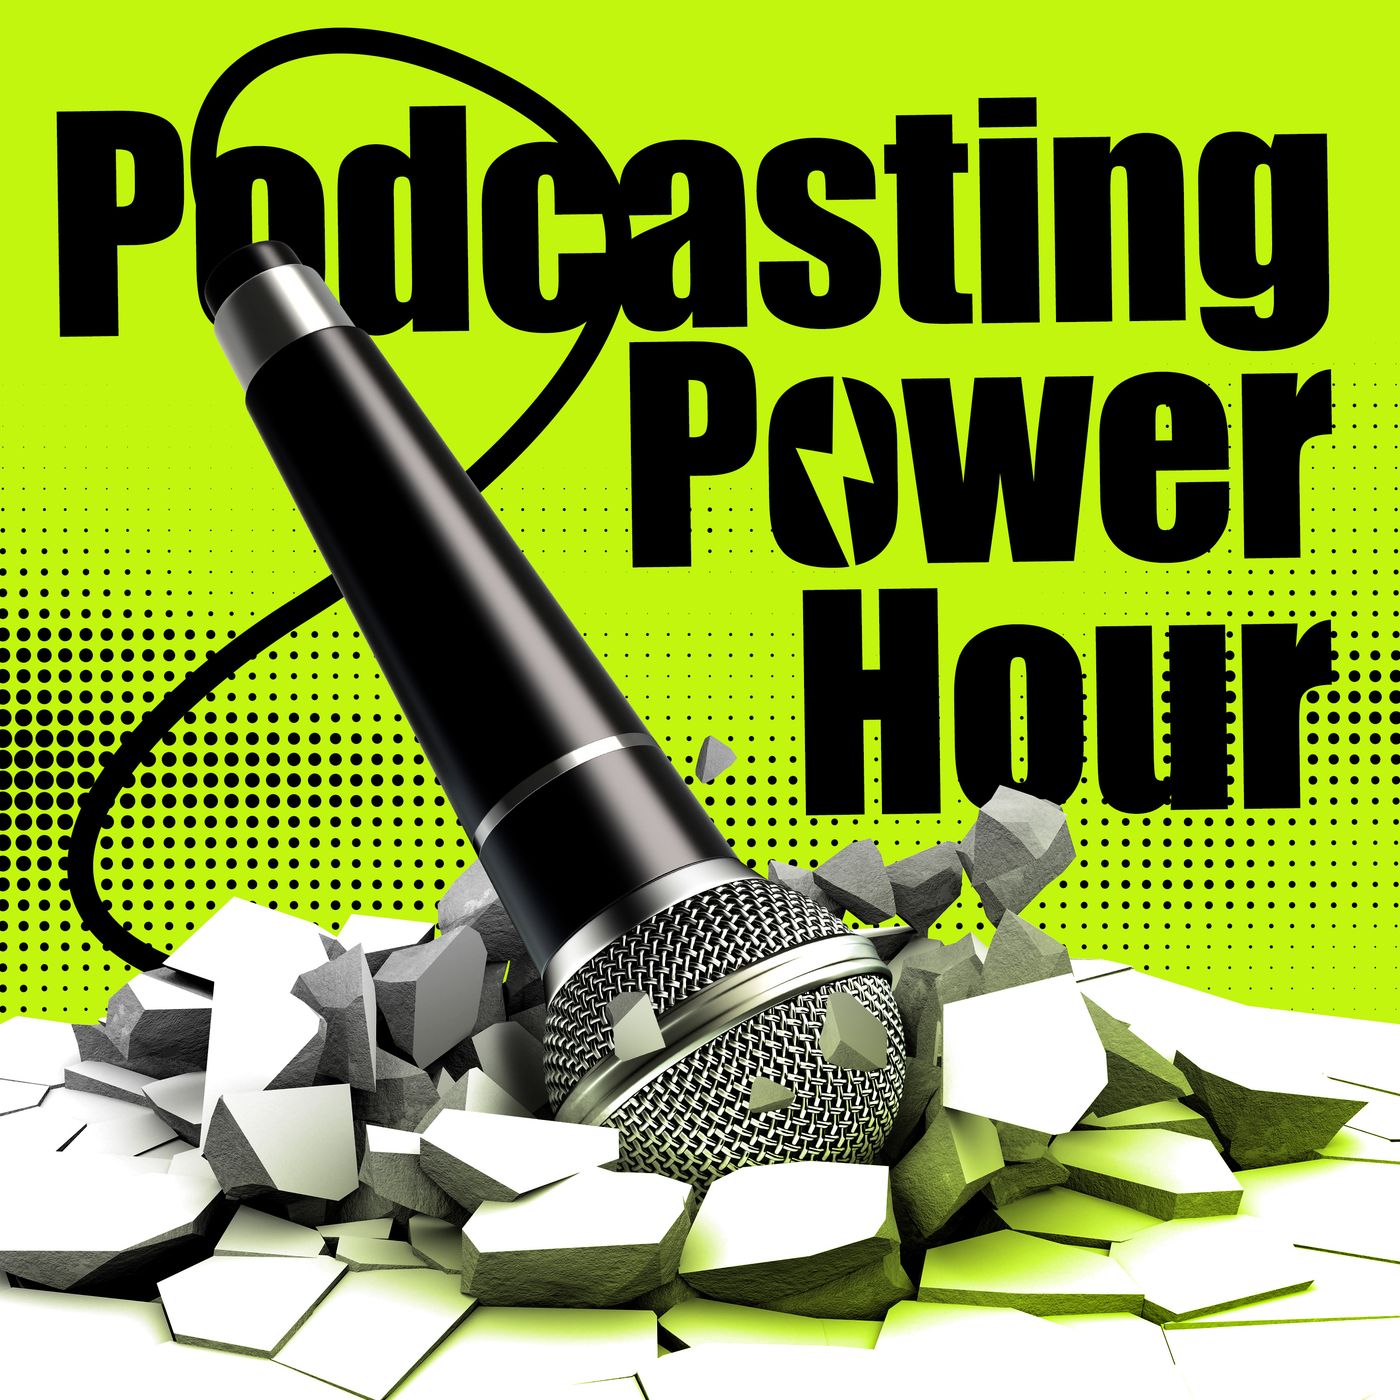 Podcasting Power Hour: How to understand and manage your influence with Jason Falls